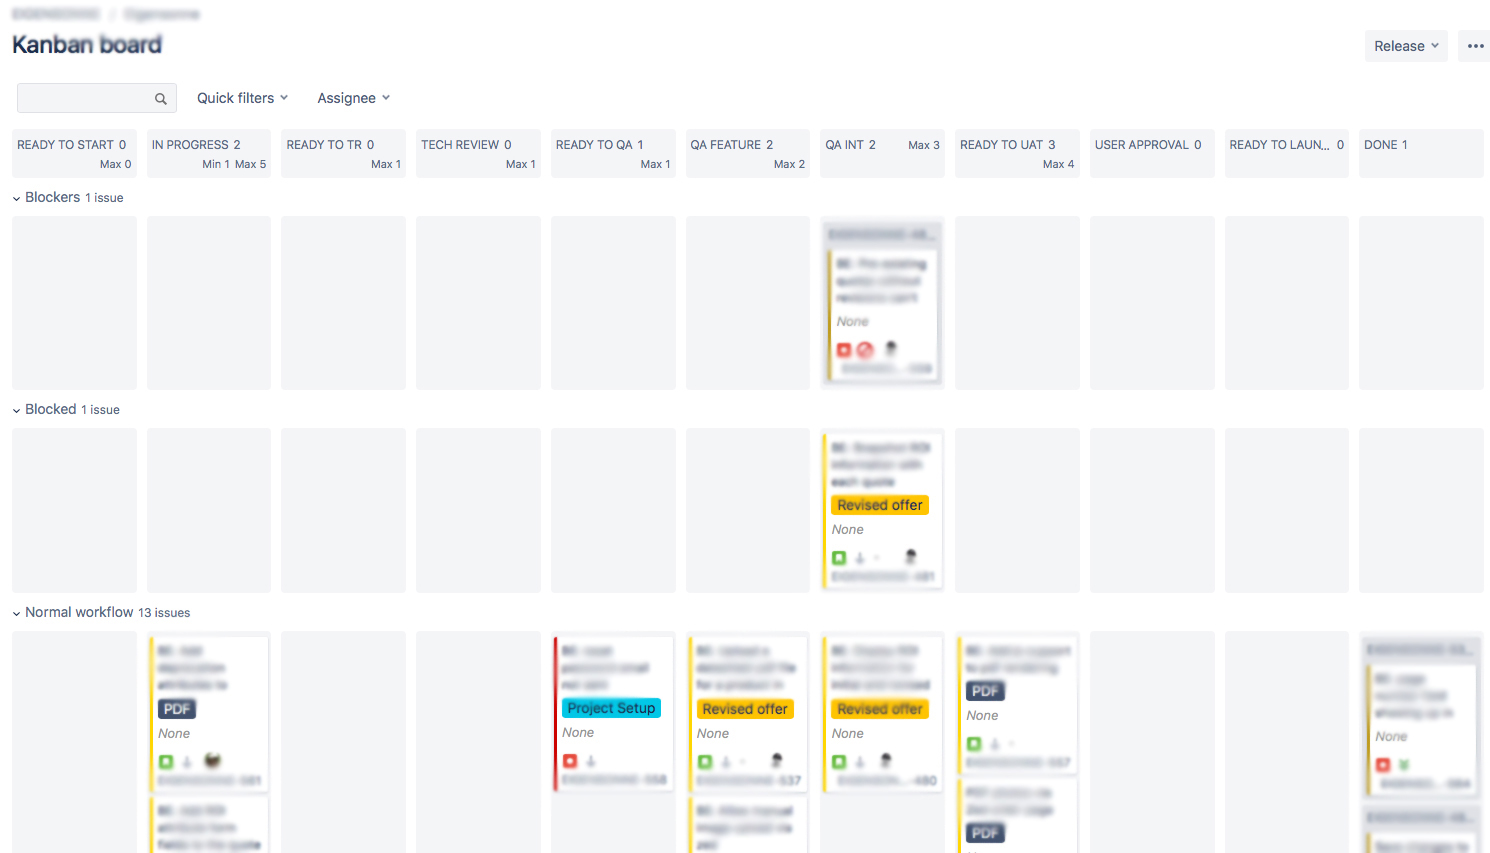 screenshot from Jira showing pull system